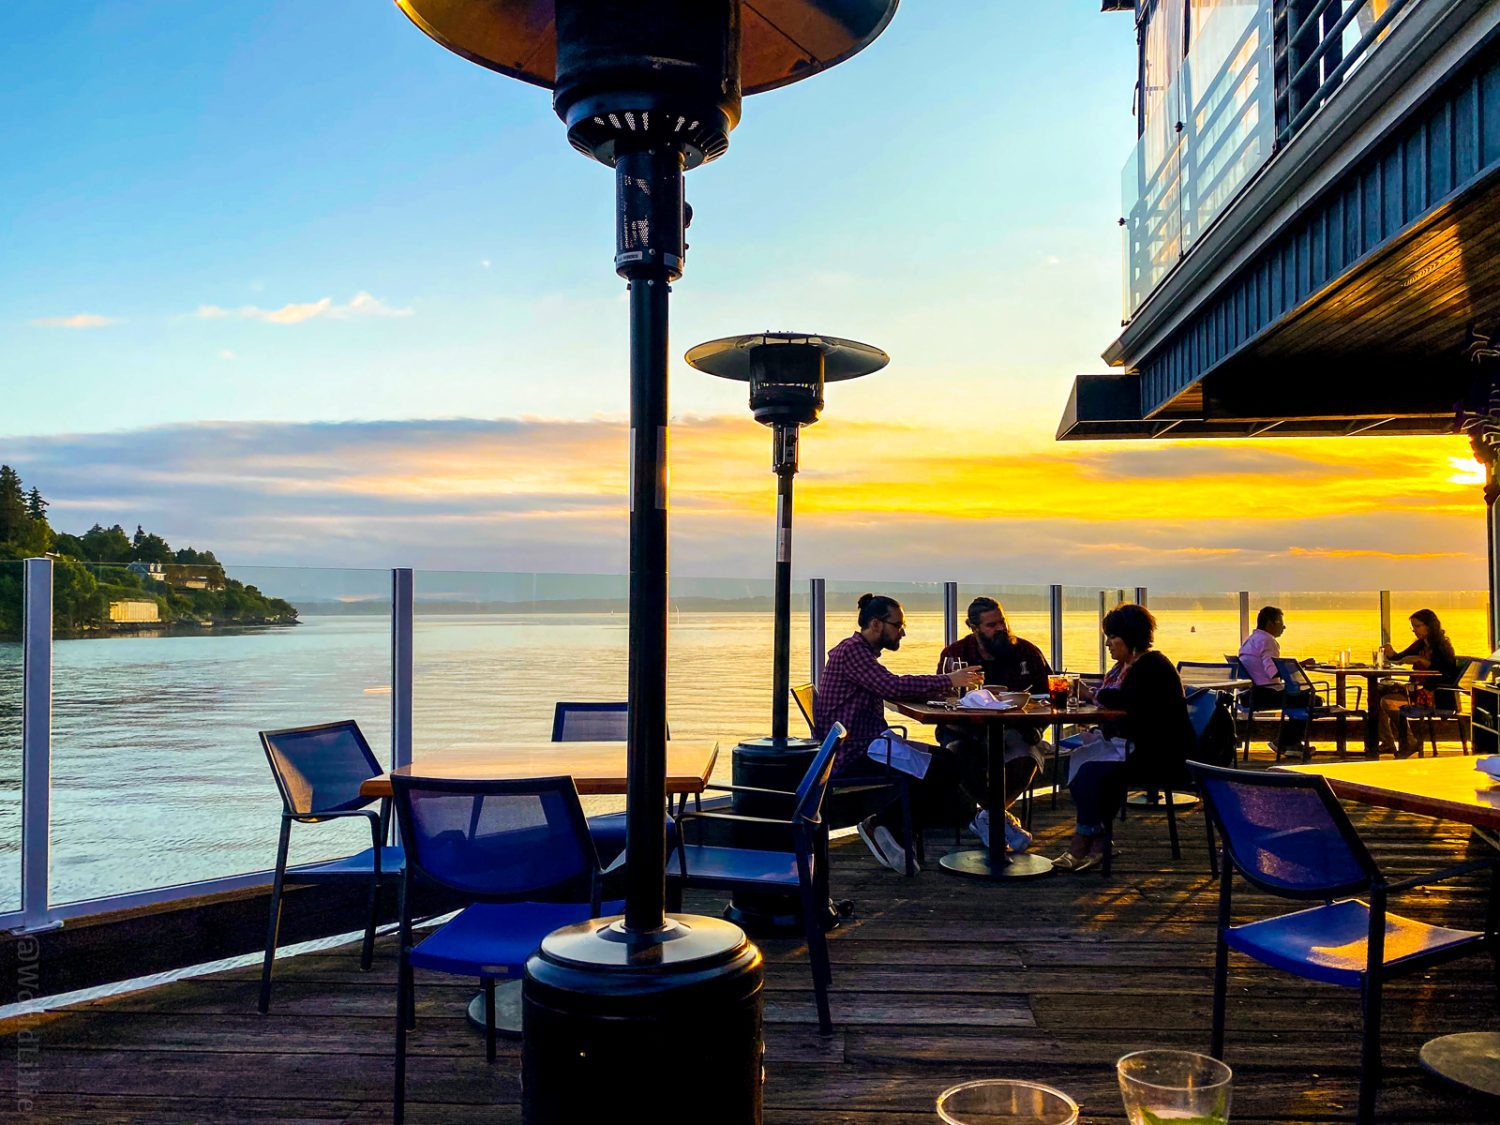 Talk about dinner with a view!